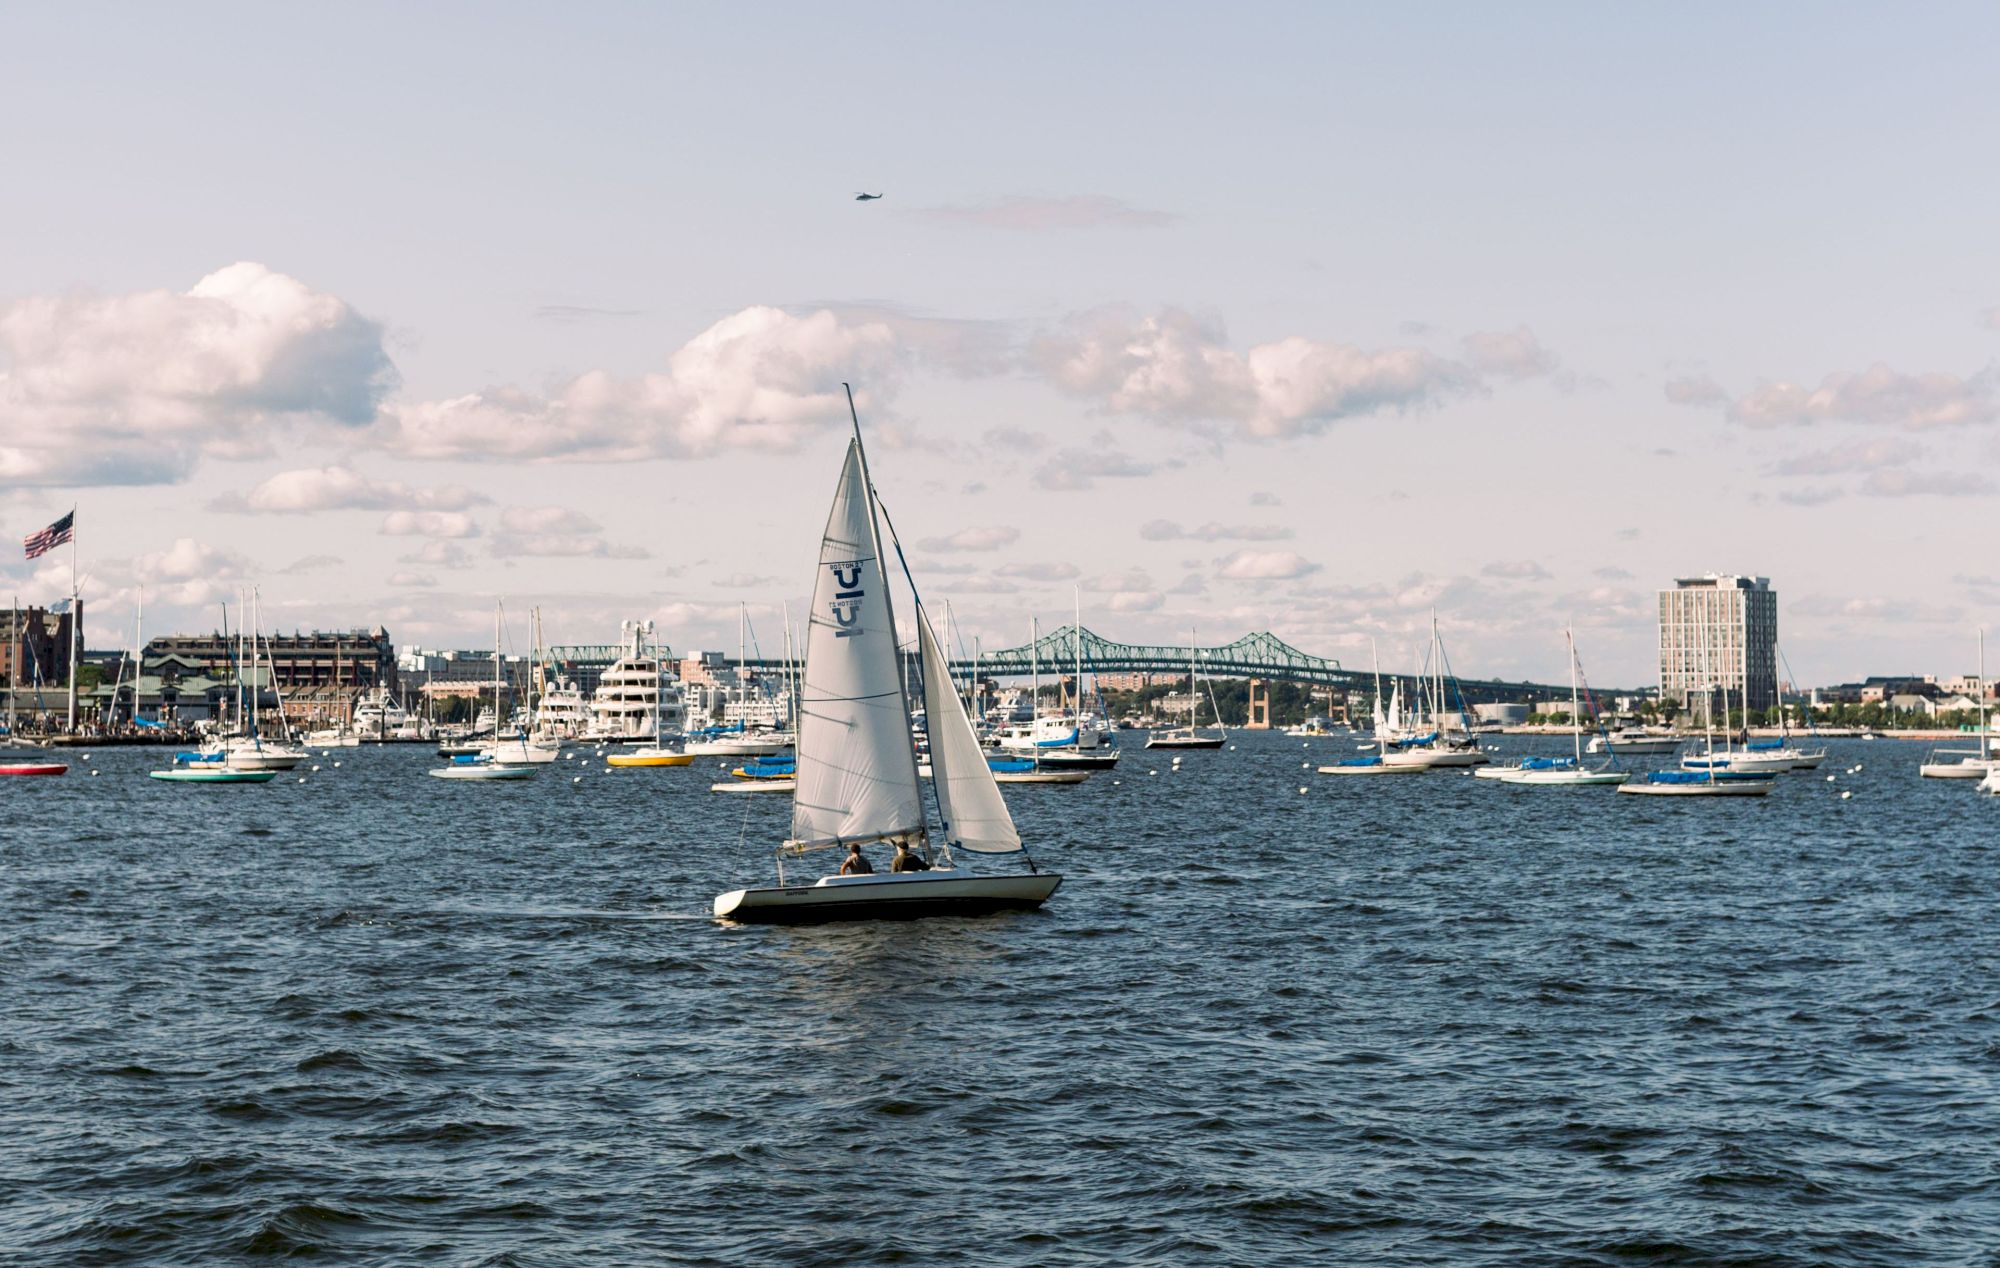 A sailboat on the water with a city skyline and blue sky in the background